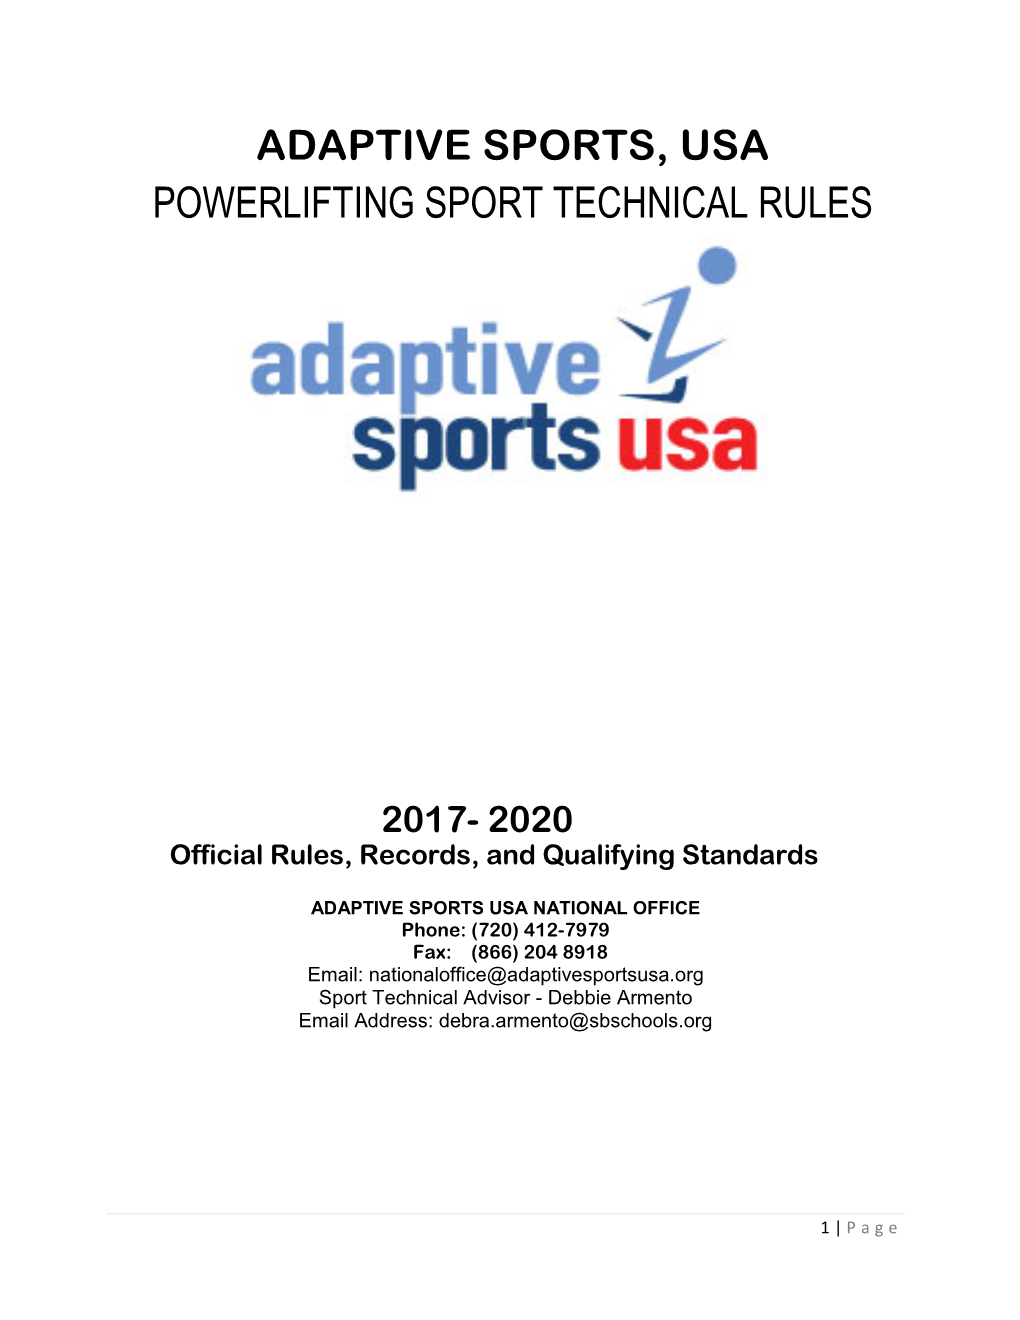 Powerlifting Sport Technical Rules